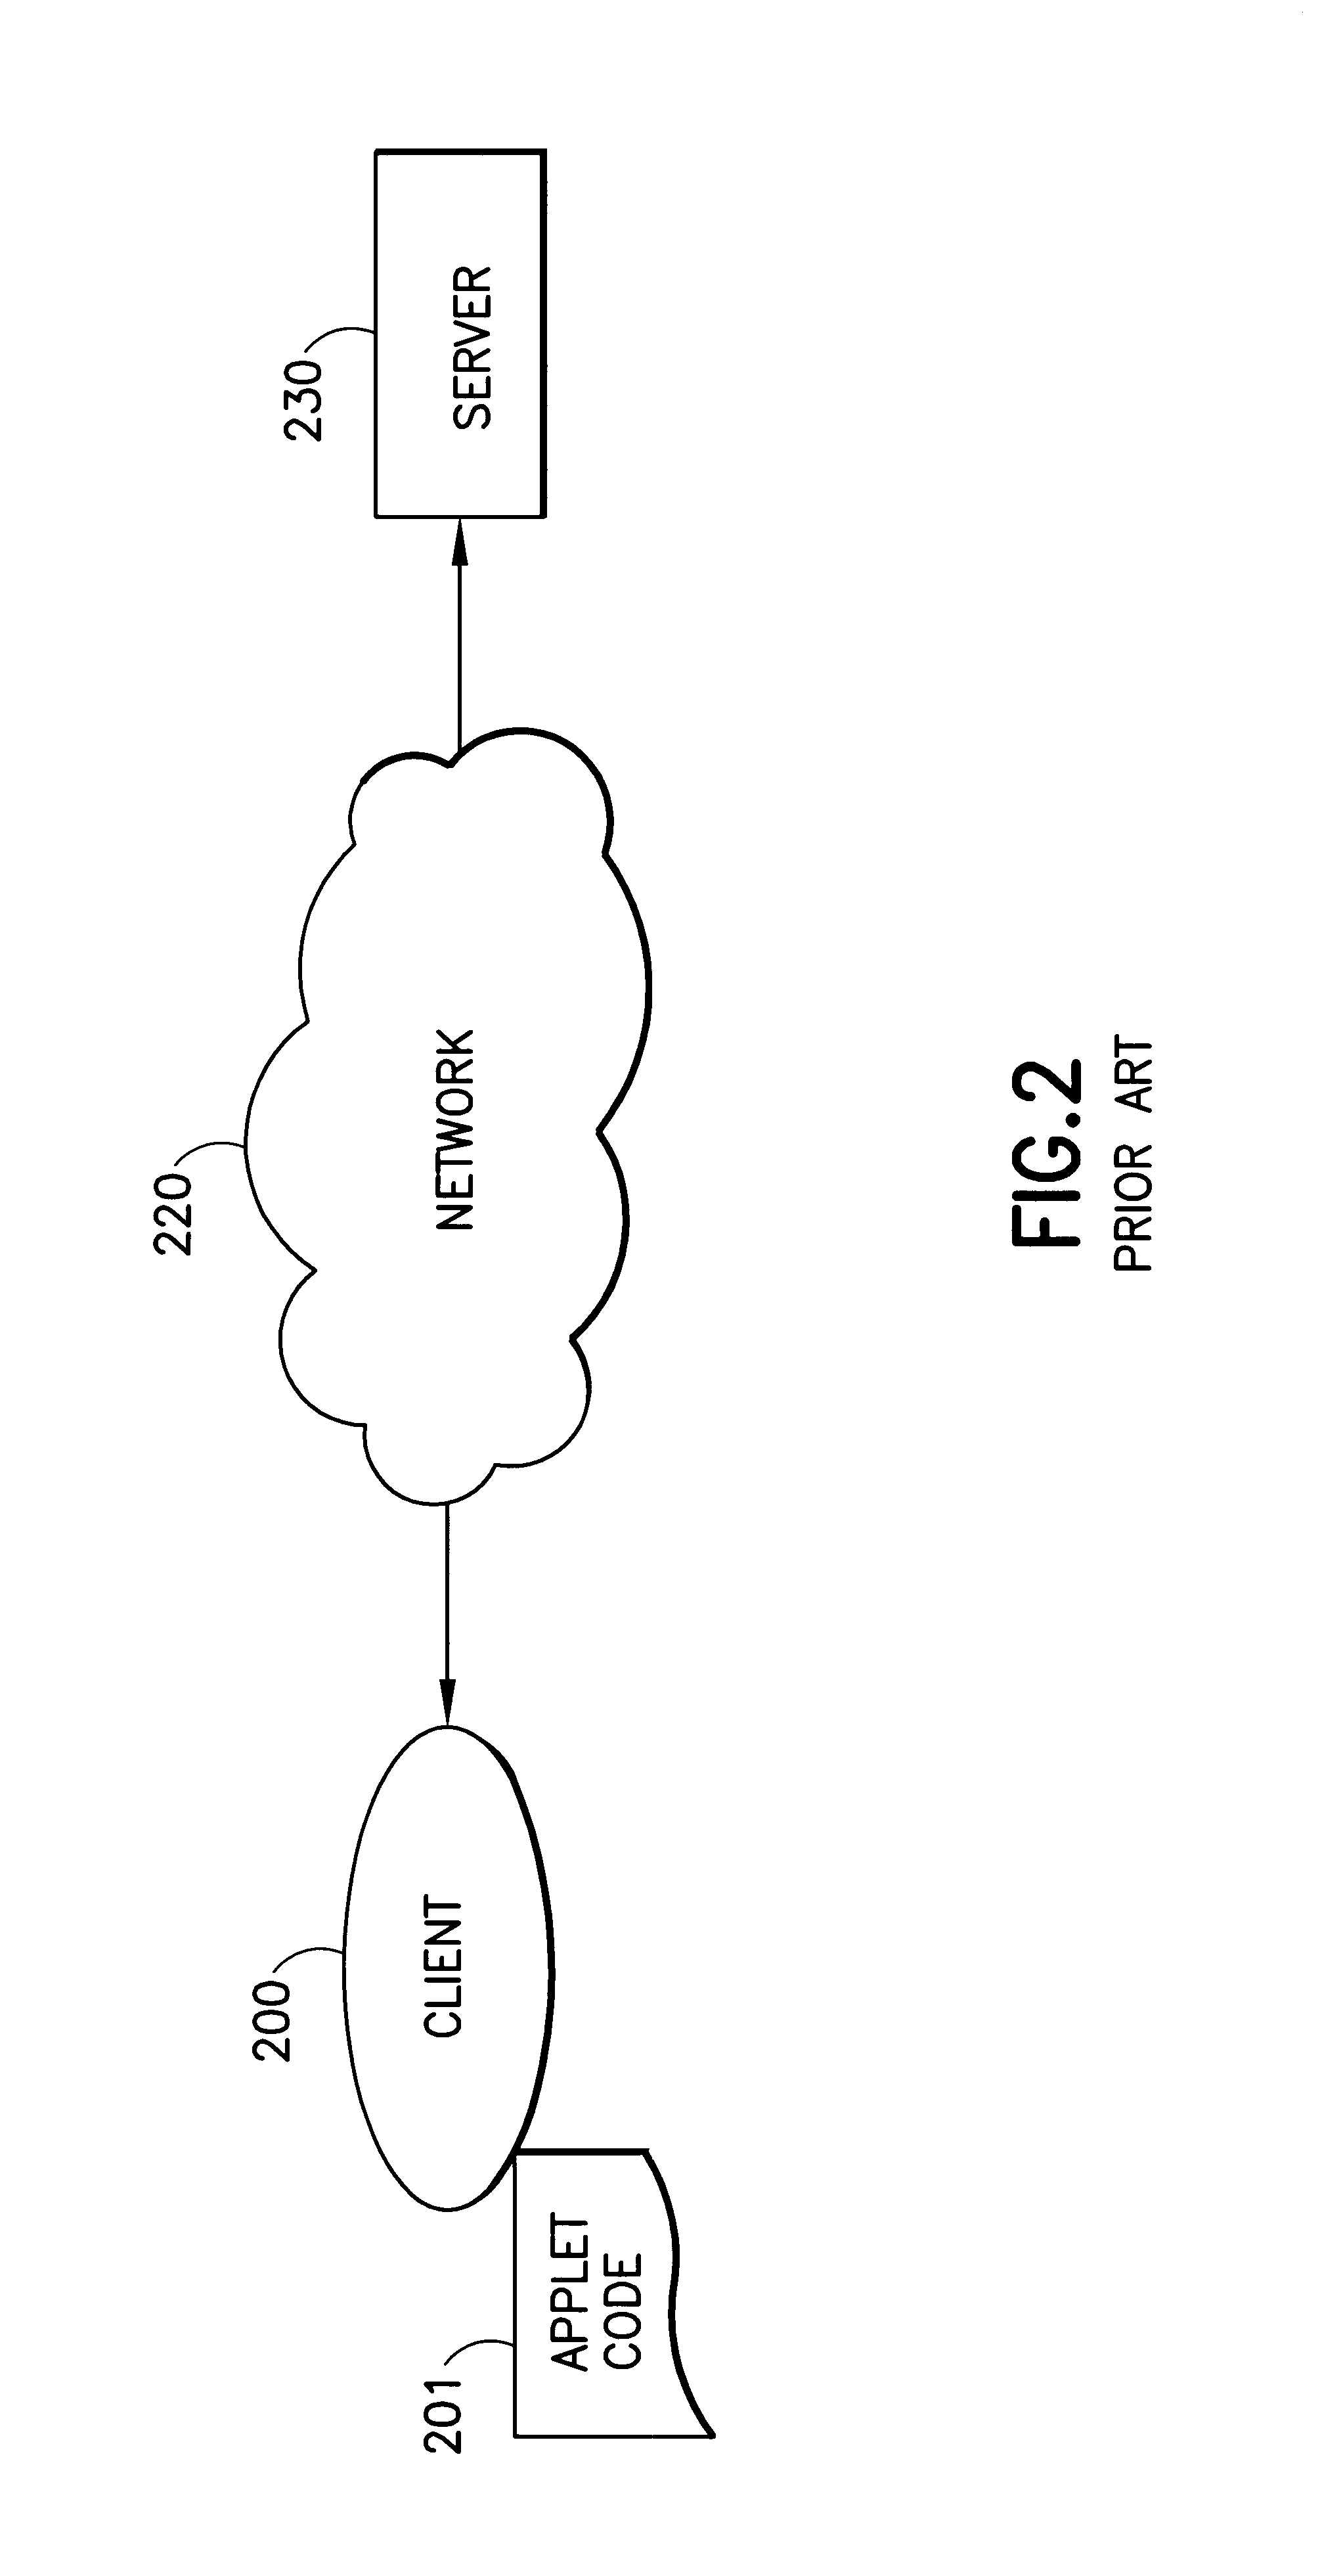 System and method for conducting disconnected transactions with service contracts for pervasive computing devices